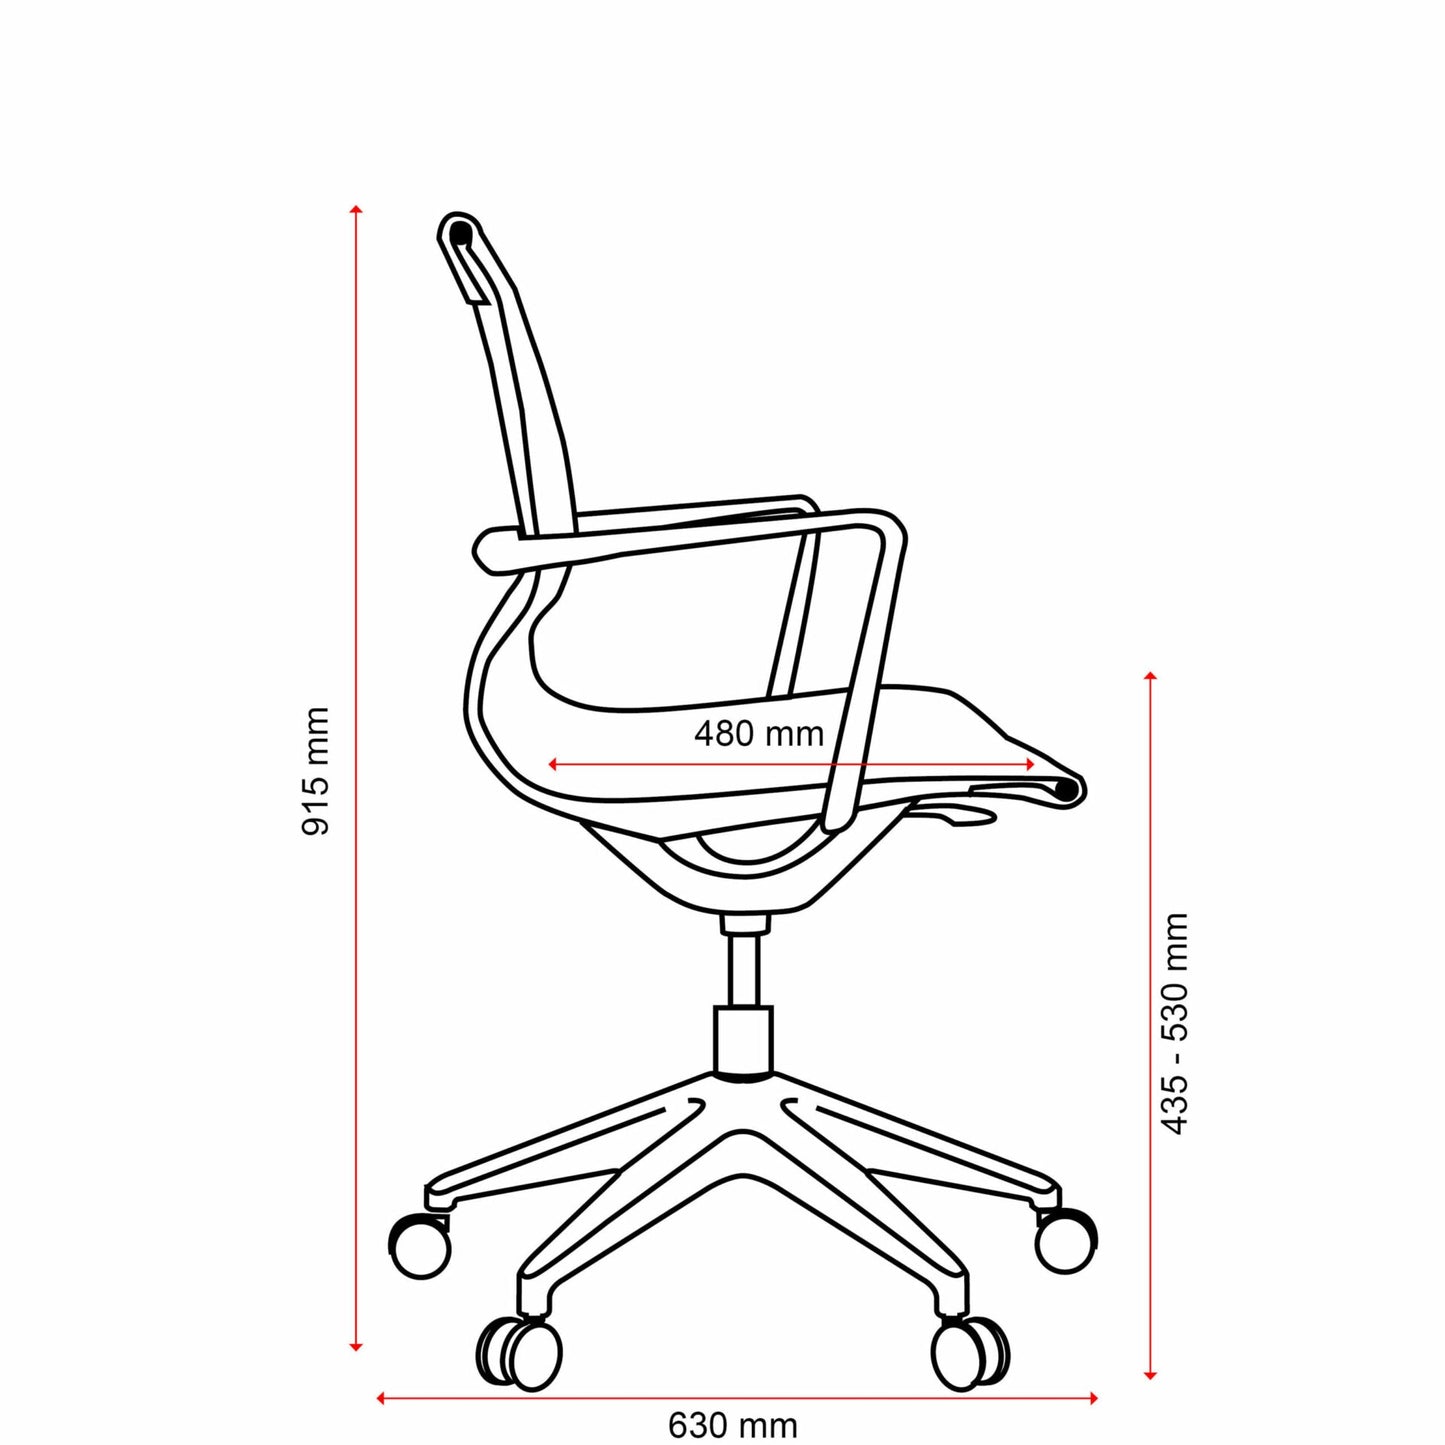 Diablo Fabric Mesh-Office Chairs-Smart Office Furniture